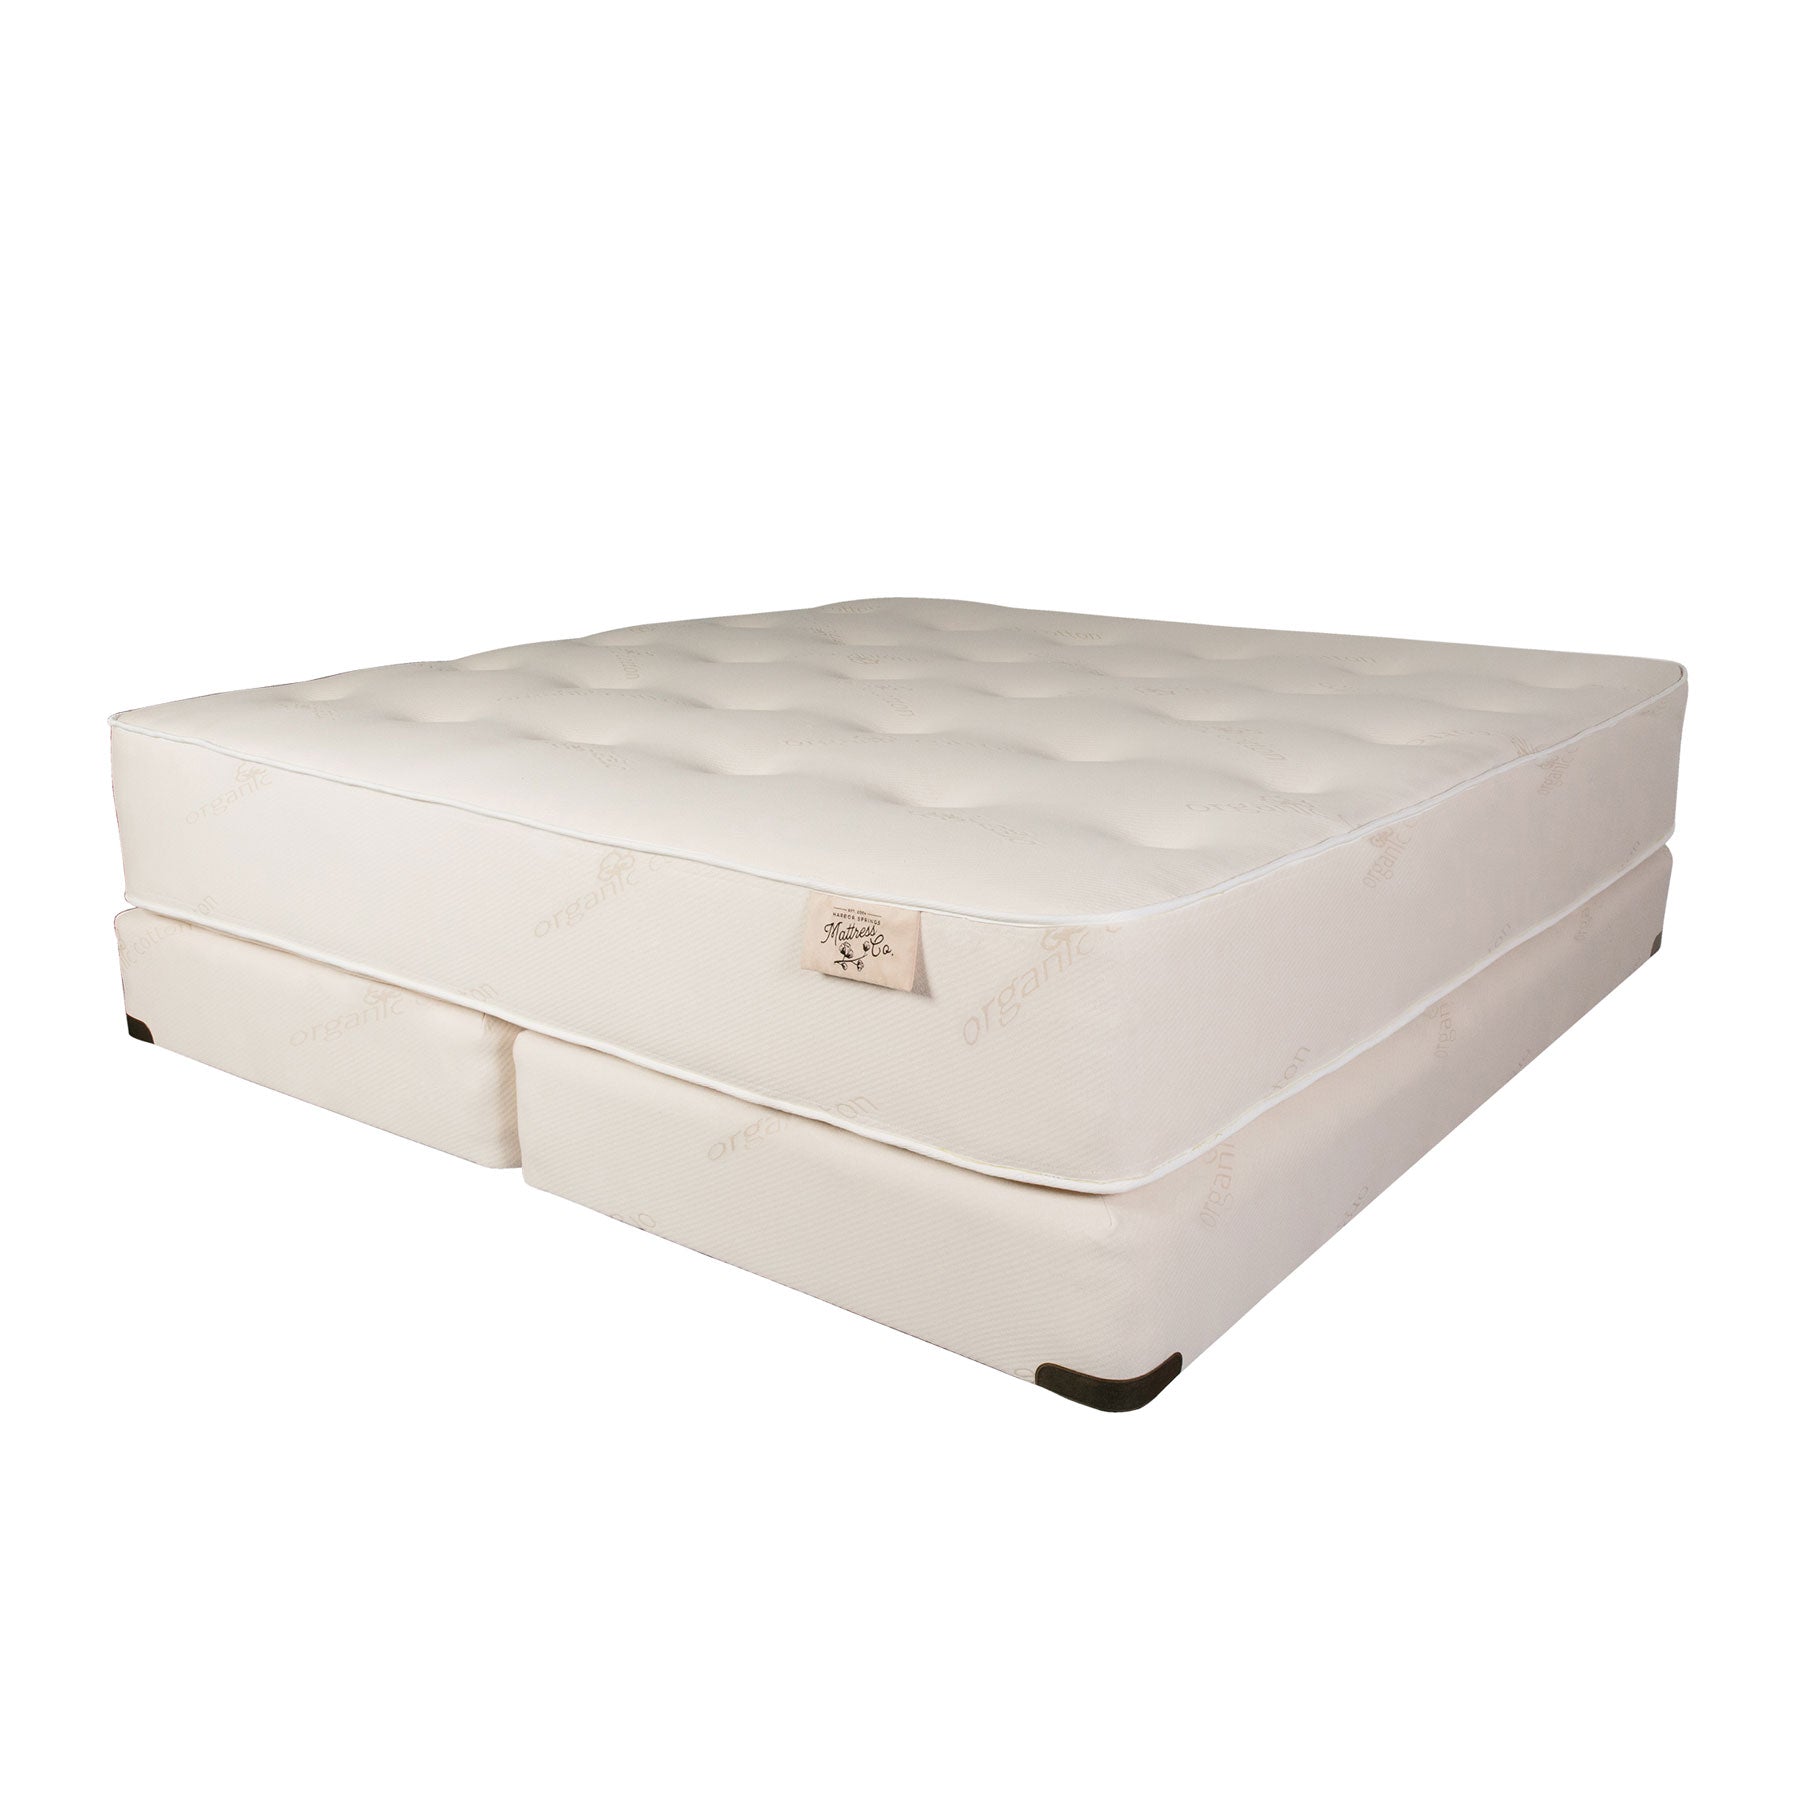 The Cozy - Natural Latex Luxury Bed - Harbor Springs Mattress Co.